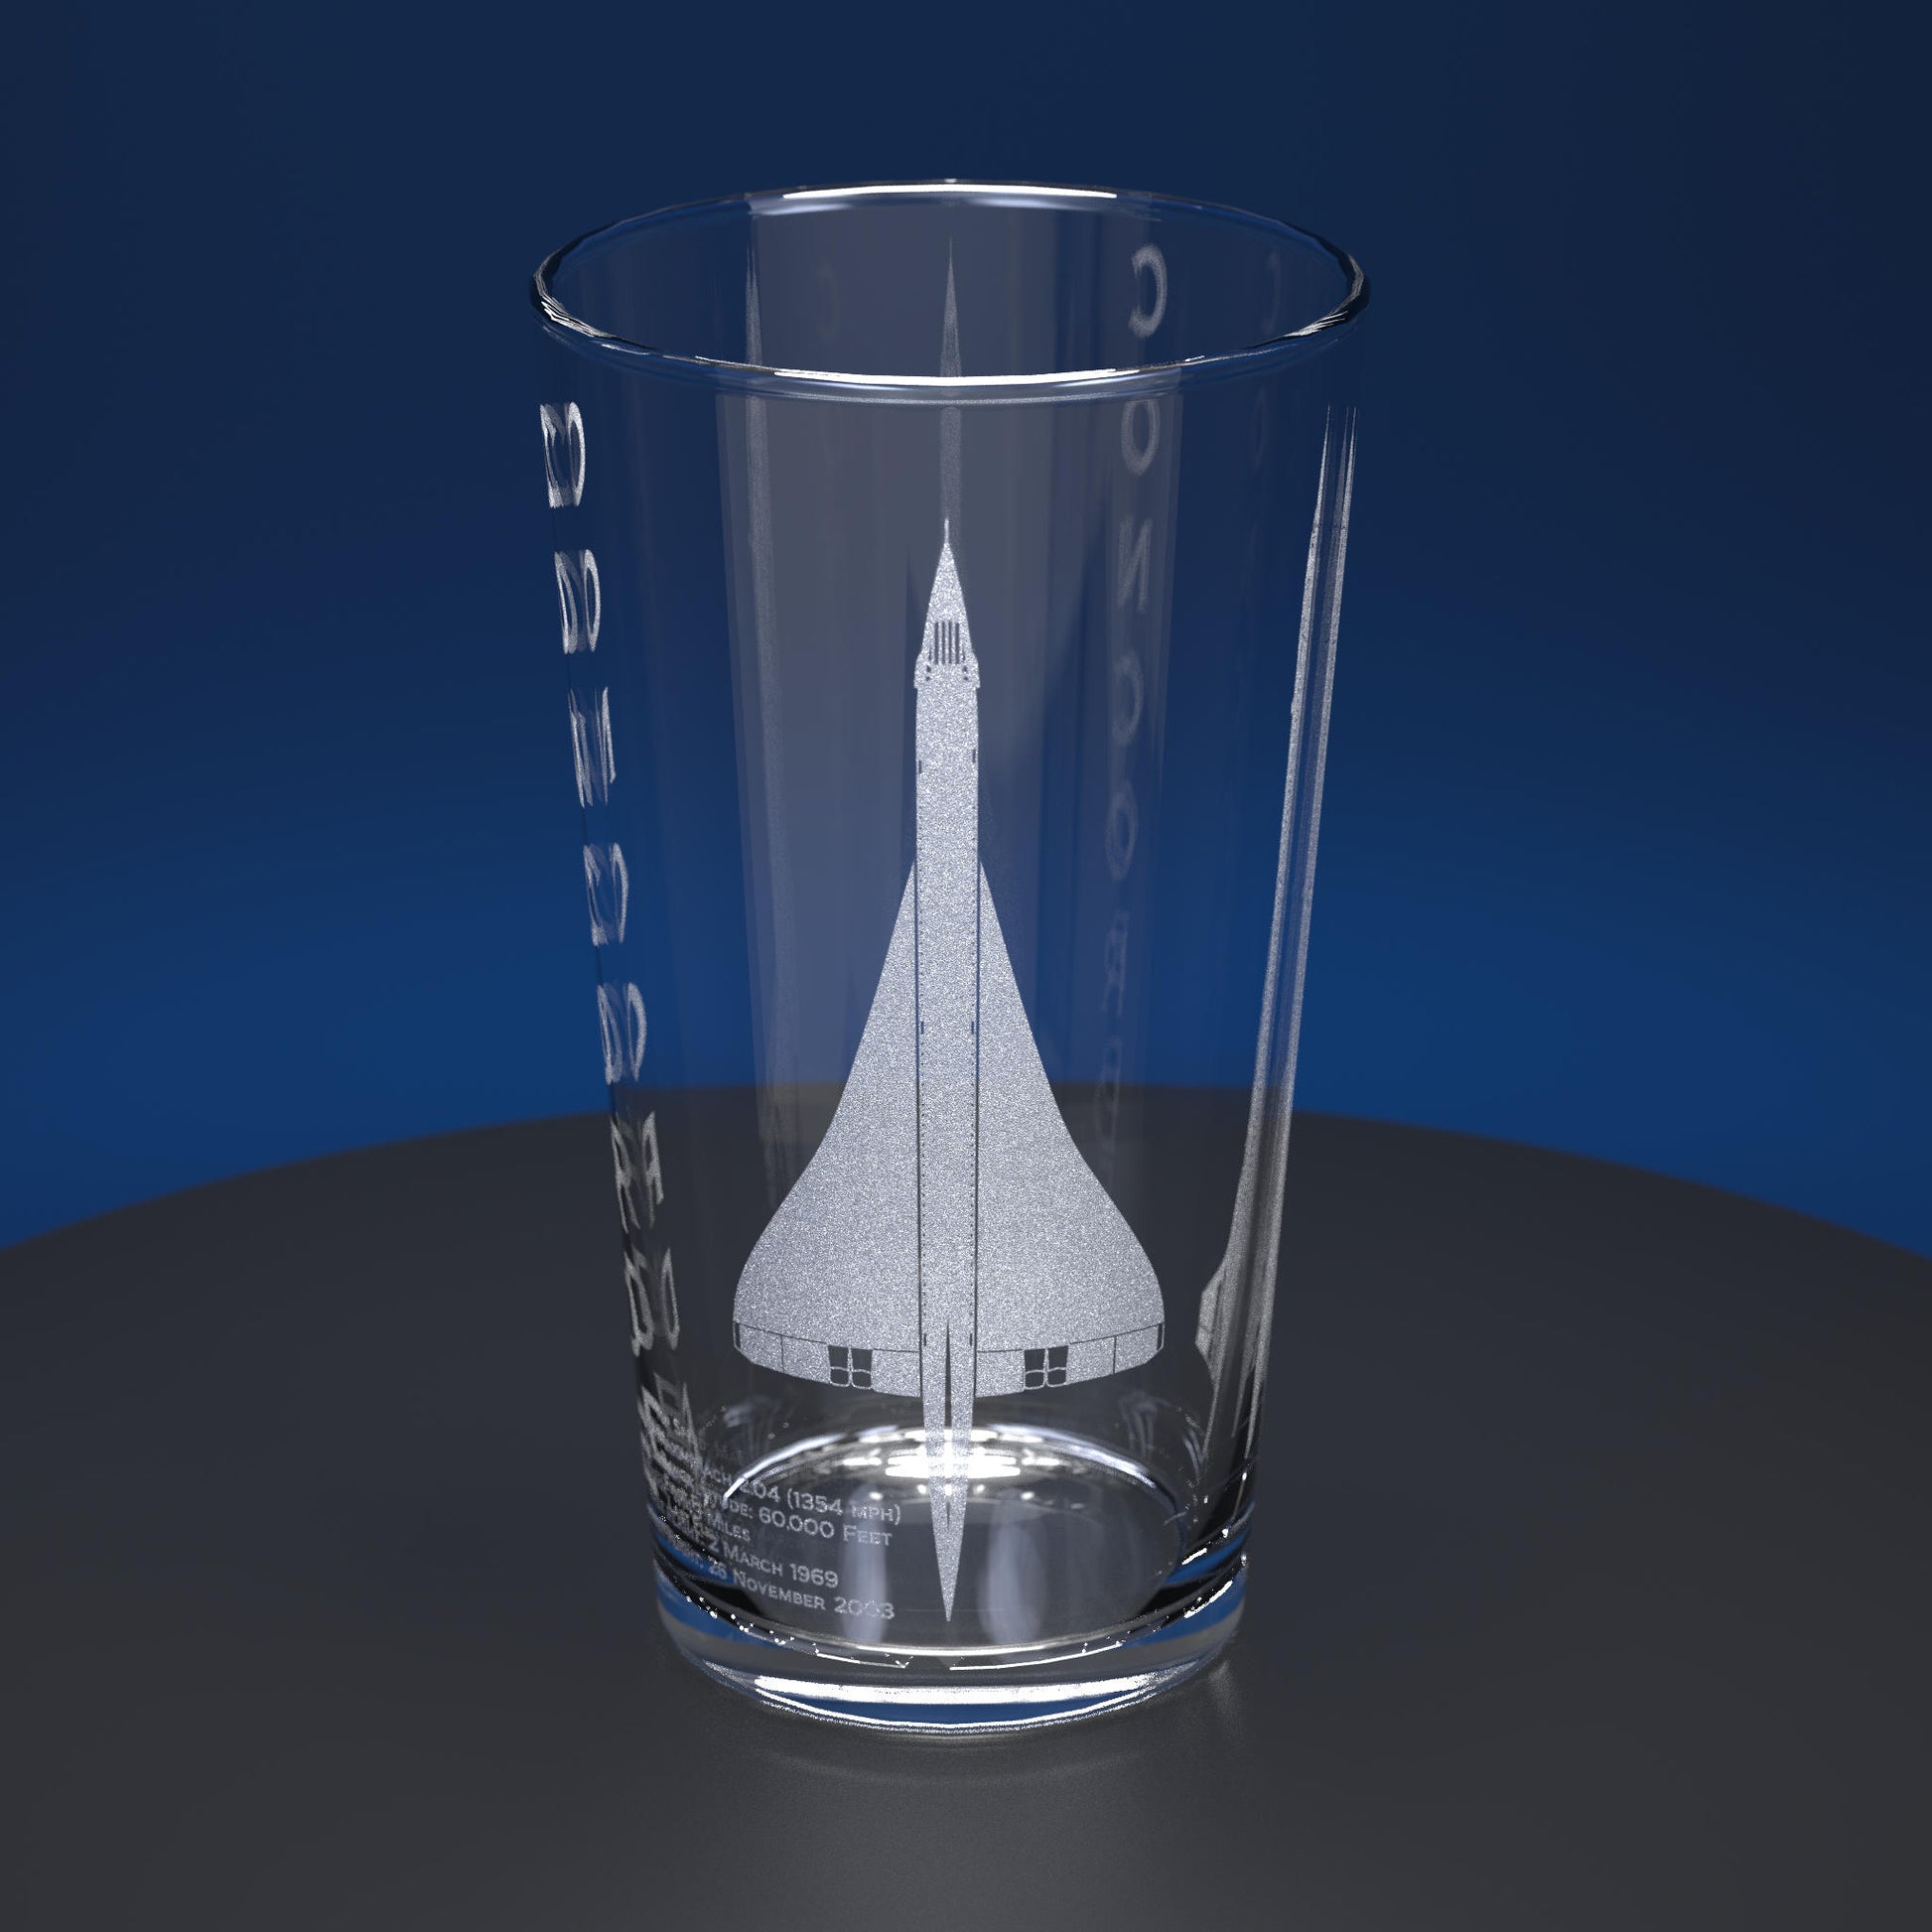 pint glass engraved with Concorde and factual information about concorde